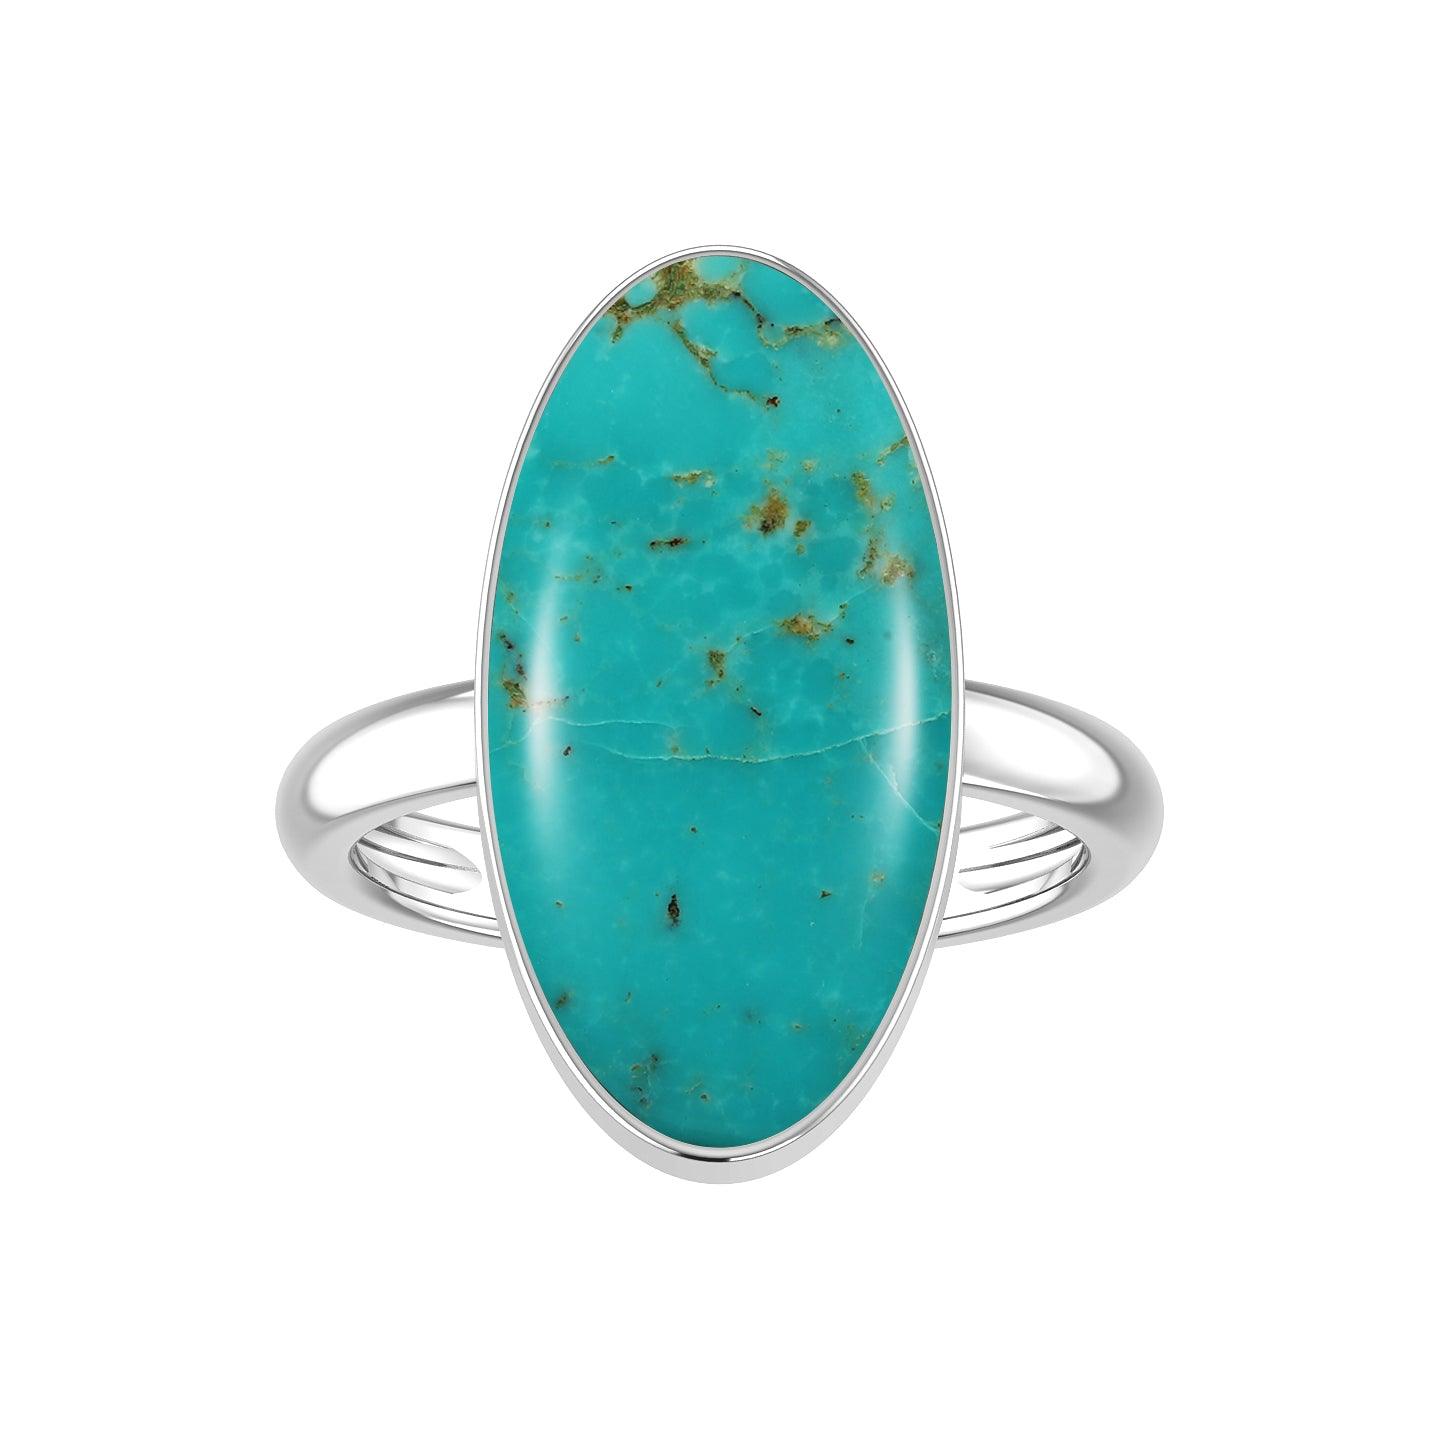 Natural Turquoise Ring 925 Sterling Silver Bezel Set Handmade Jewelry Pack of 6 - (Box 7)